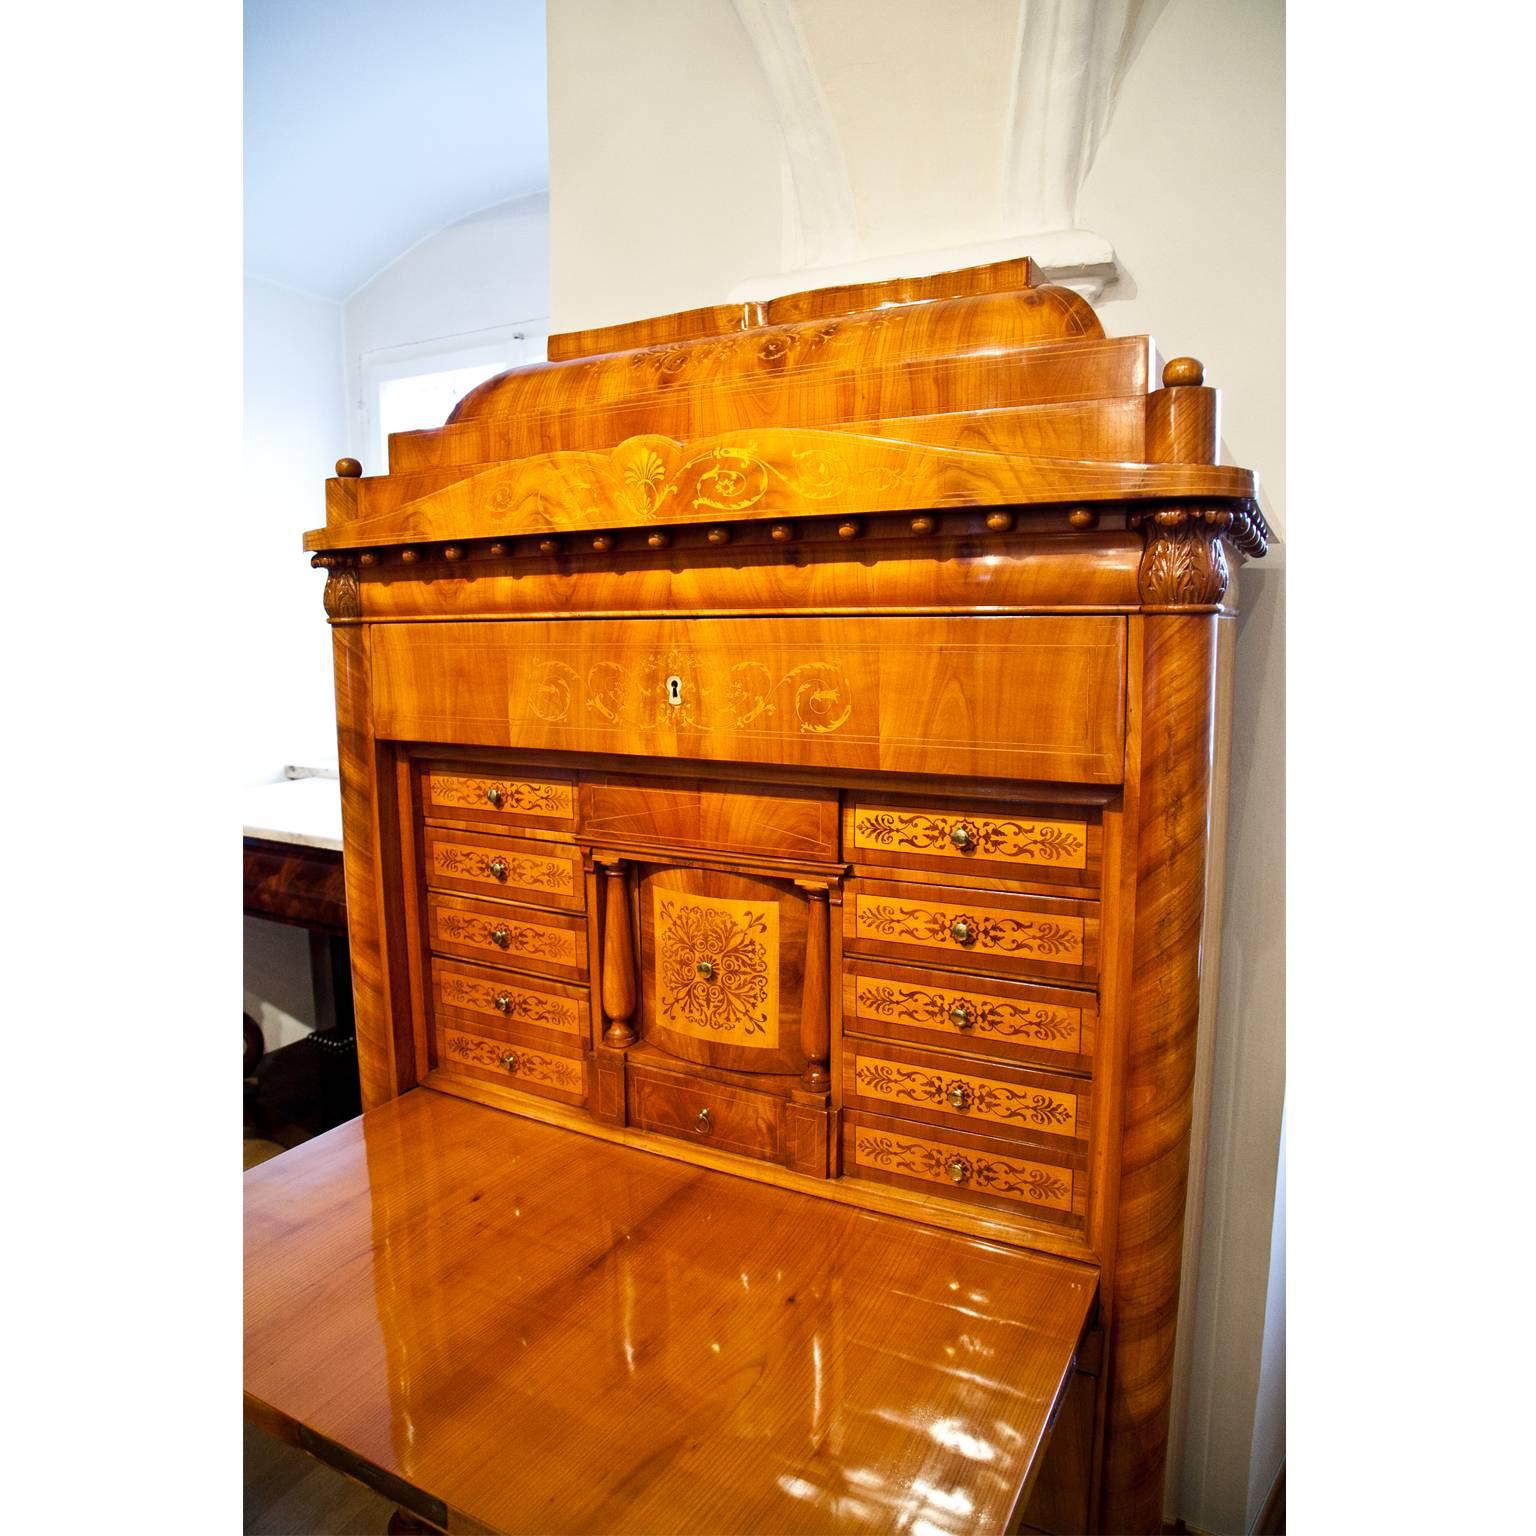 Cherrywood Biedermeier Secretaire with a three-drawer chests of drawers base and a lockable top drawer. The stepped pediment with revolving ball-frieze hides another drawer. Three-quarter columns with carved leaf-capitals flank the secretaire, which